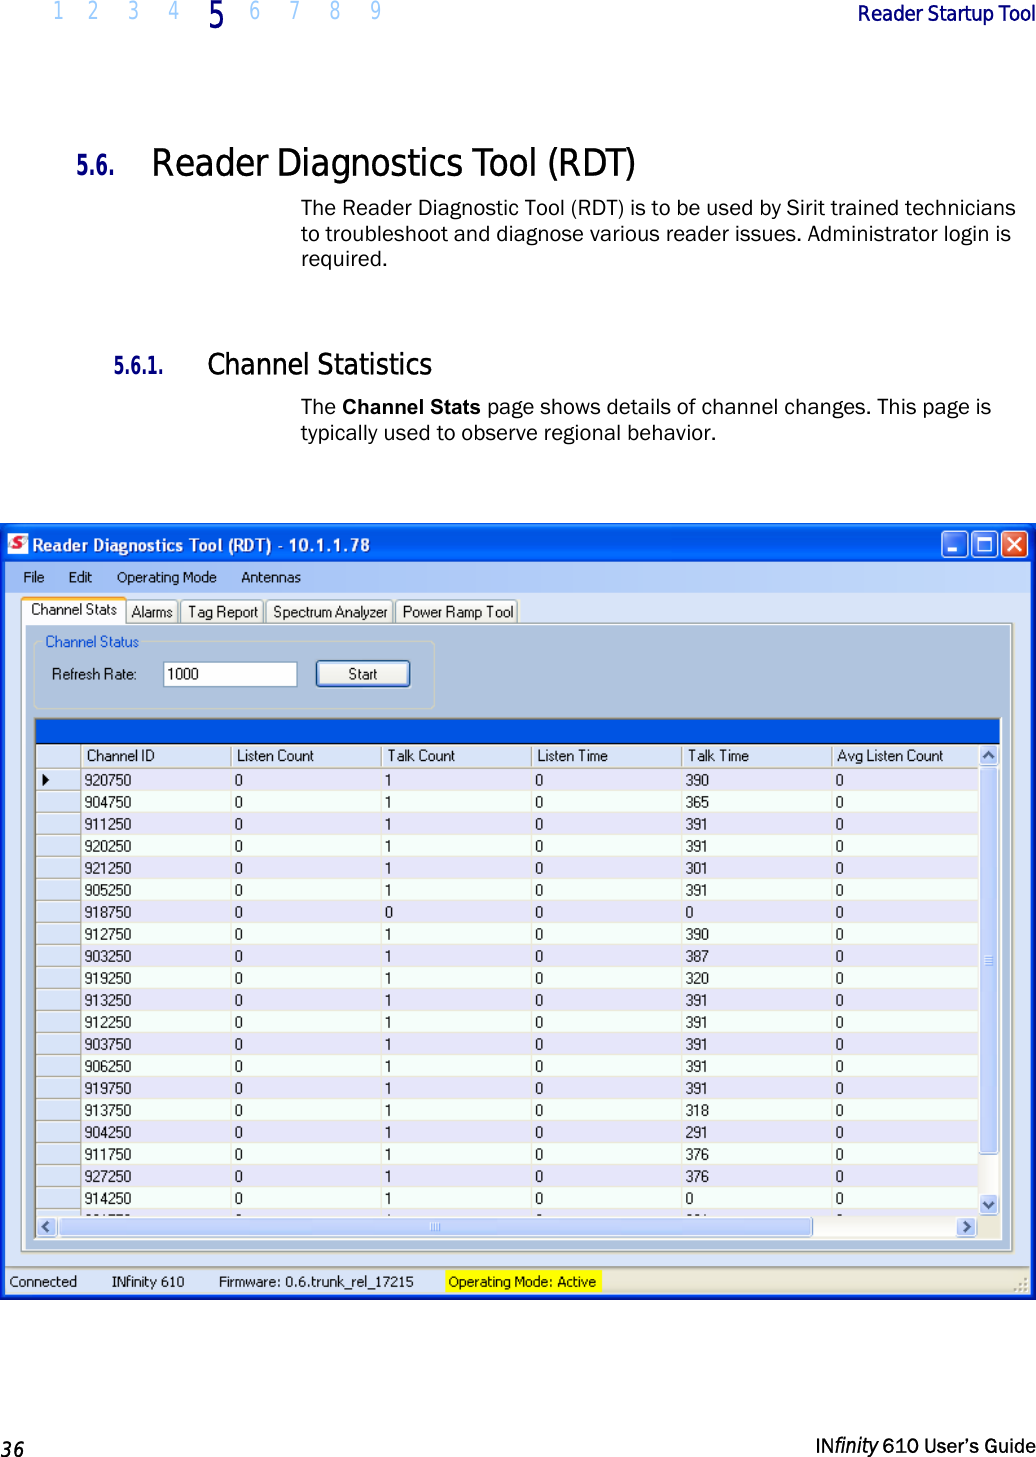  1 2  3  4 5  6 7 8 9        Reader Startup Tool   36   INfinity 610 User’s Guide  5.6. Reader Diagnostics Tool (RDT) The Reader Diagnostic Tool (RDT) is to be used by Sirit trained technicians to troubleshoot and diagnose various reader issues. Administrator login is required.  5.6.1. Channel Statistics The Channel Stats page shows details of channel changes. This page is typically used to observe regional behavior.    